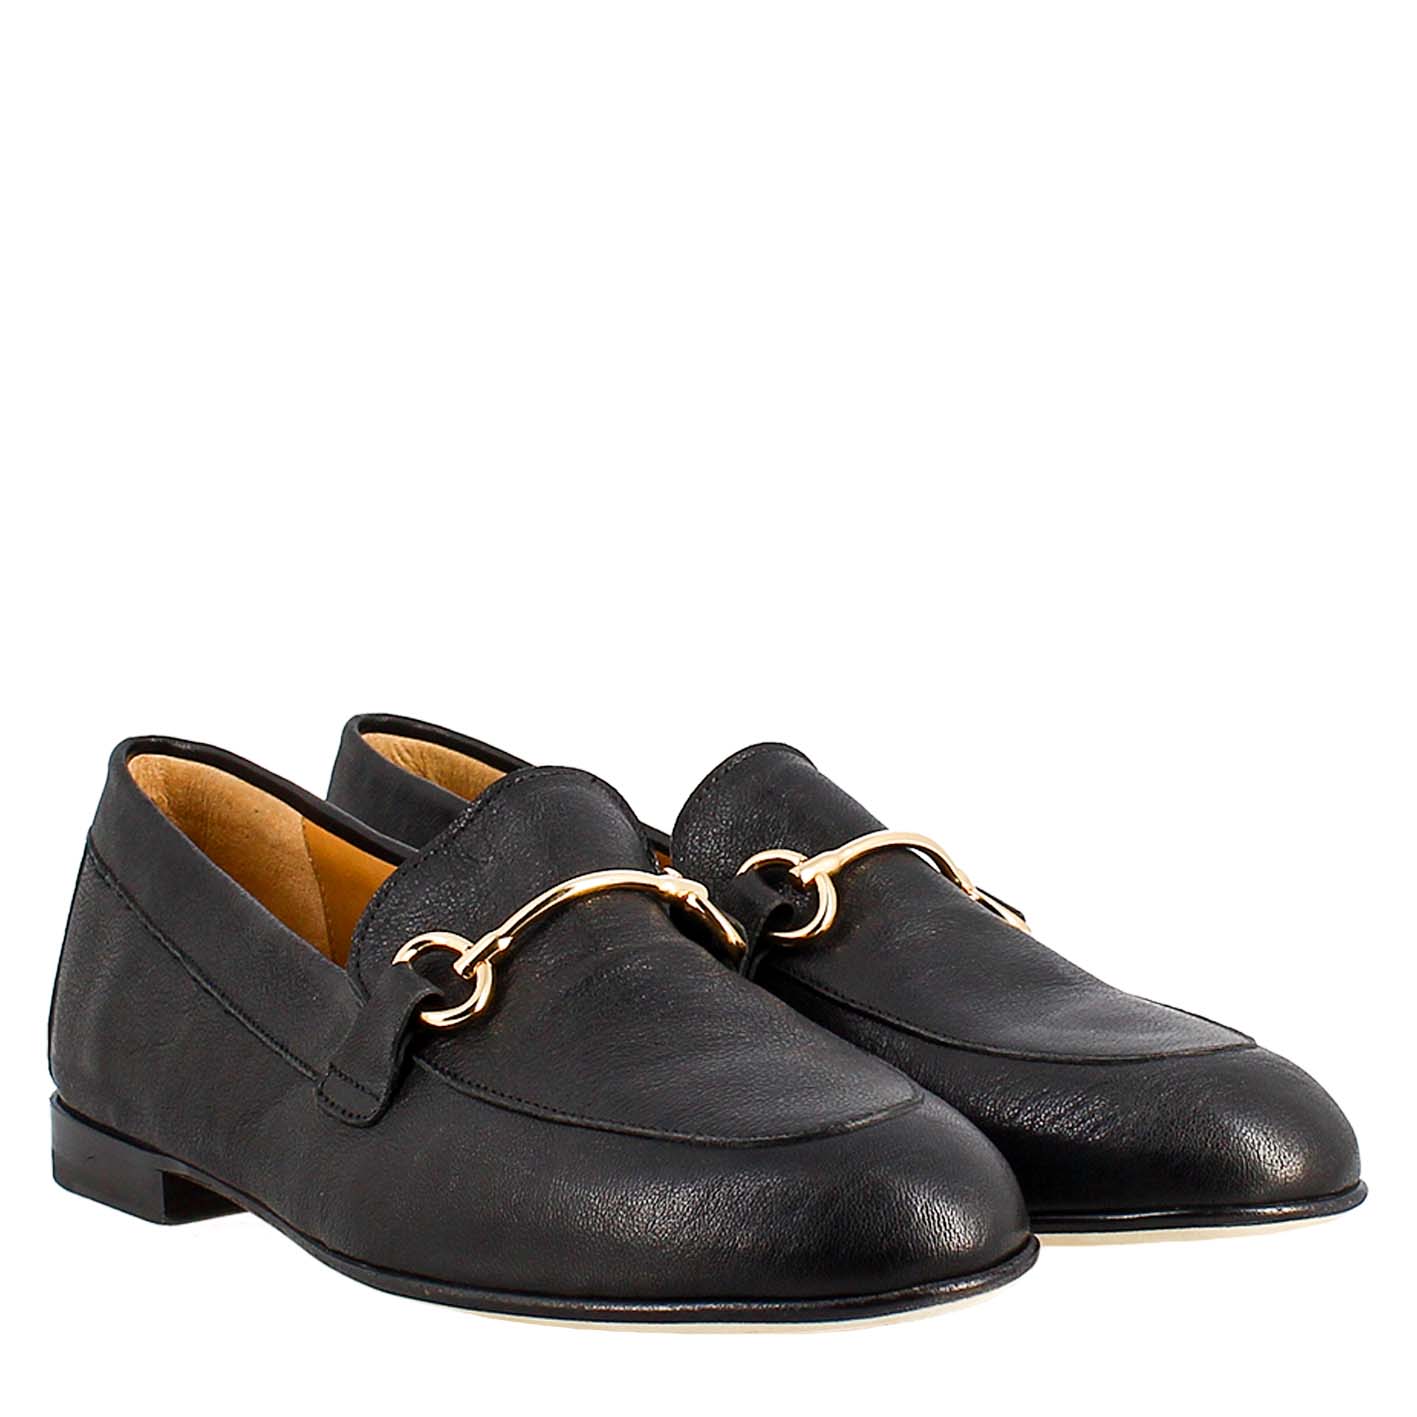 Women's Moccasin in Black Leather